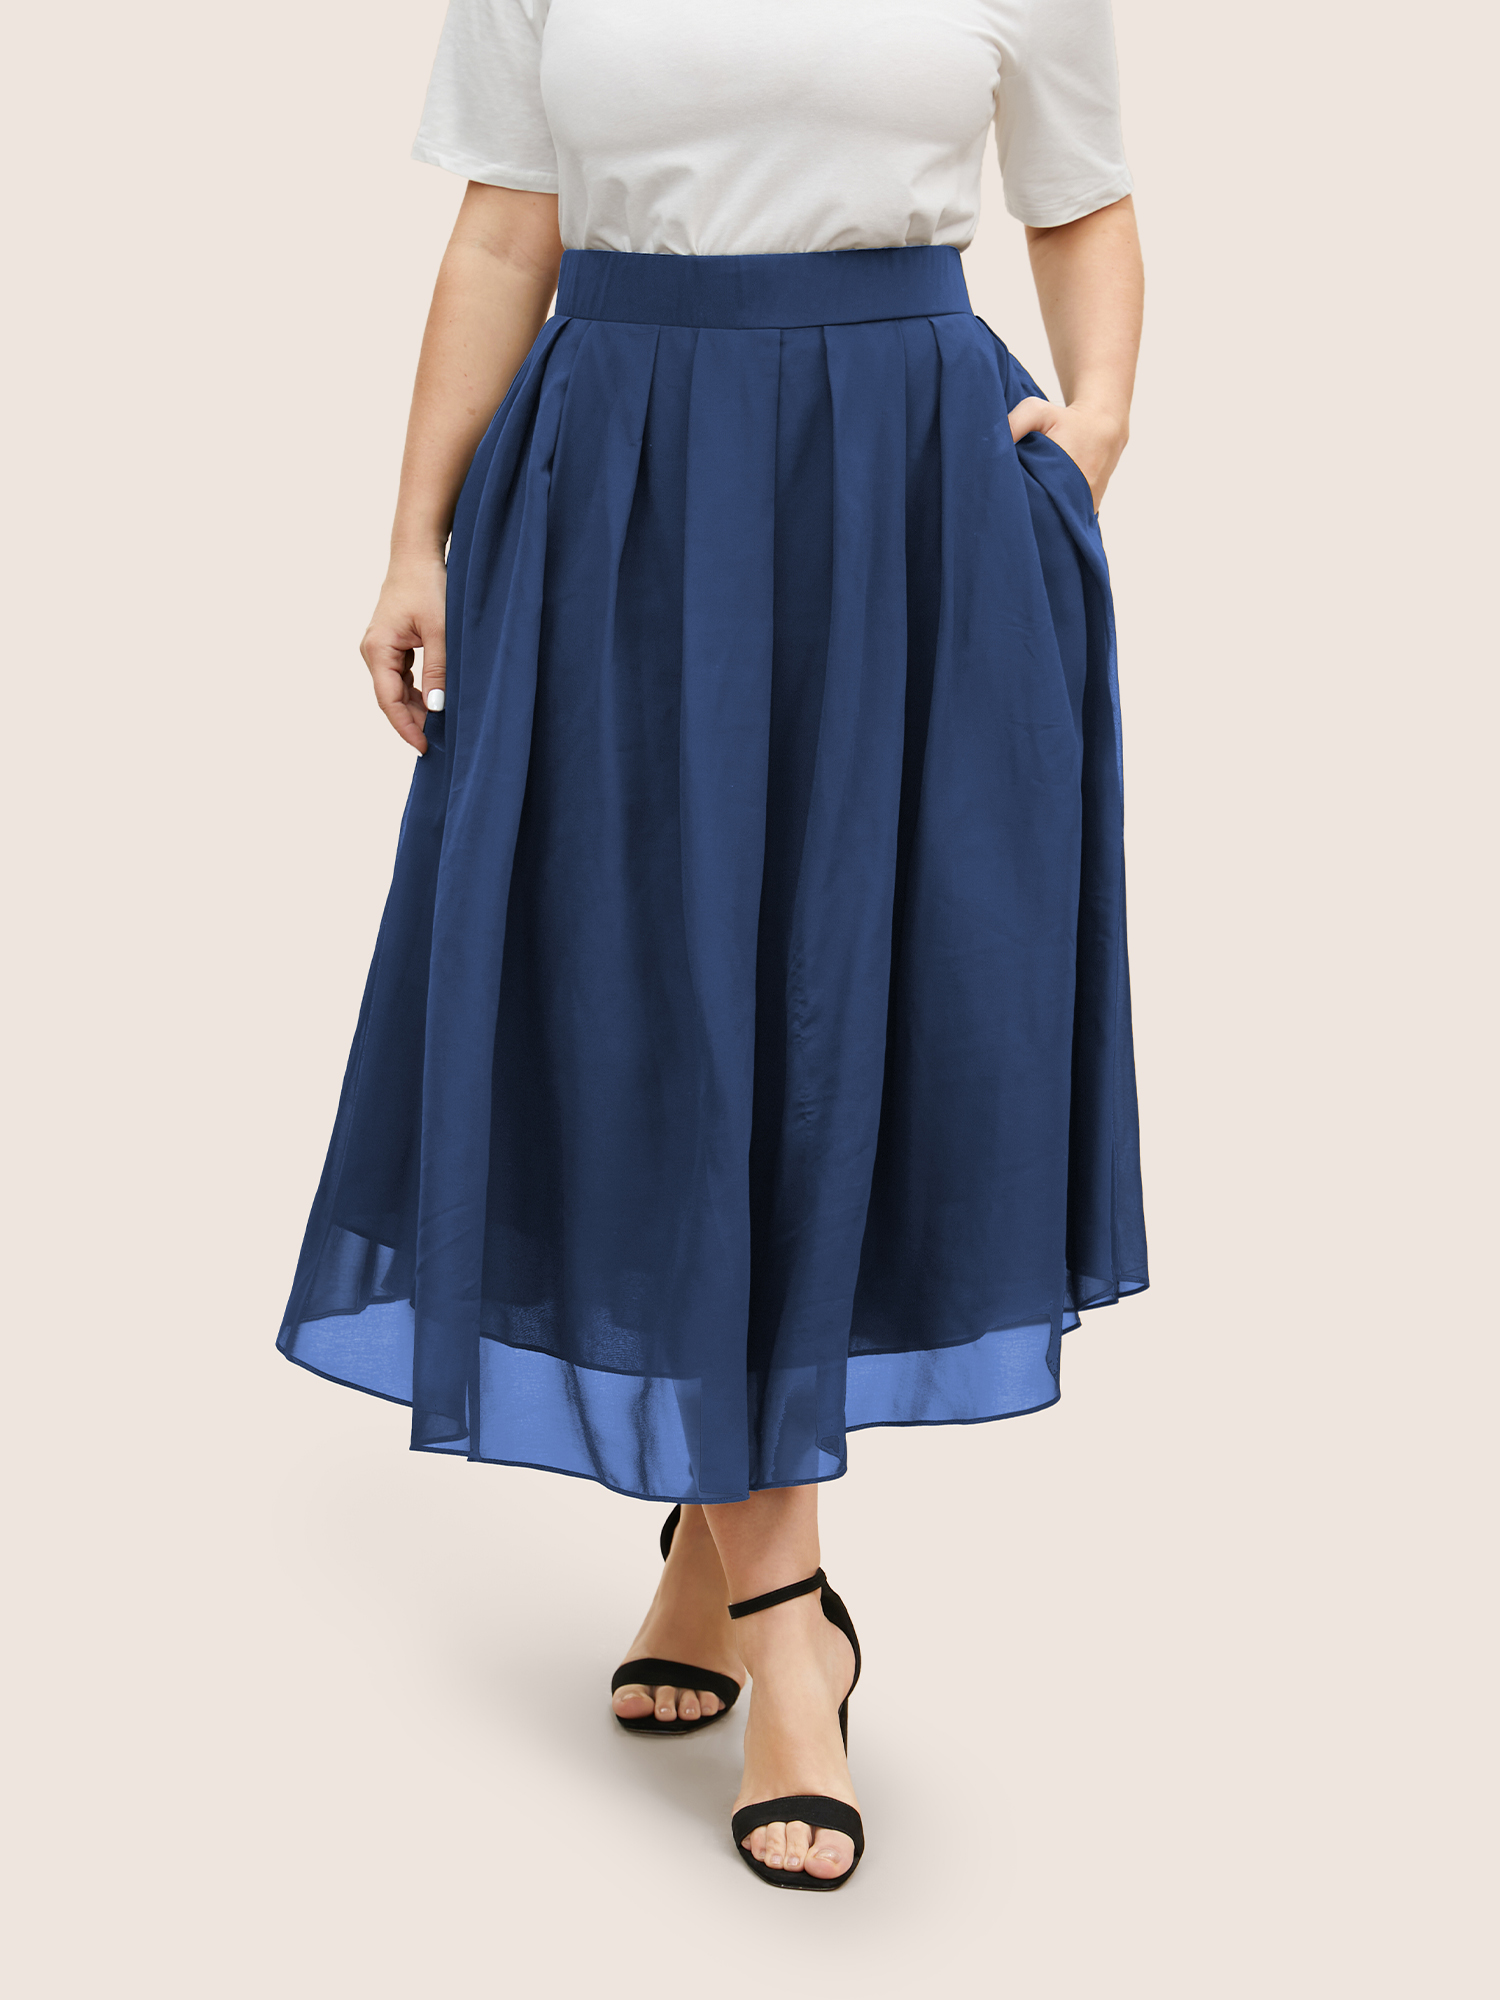 

Plus Size Chiffon Solid See Through Tiered Skirt Women Navy Elegant See through No stretch Side seam pocket Everyday Skirts BloomChic